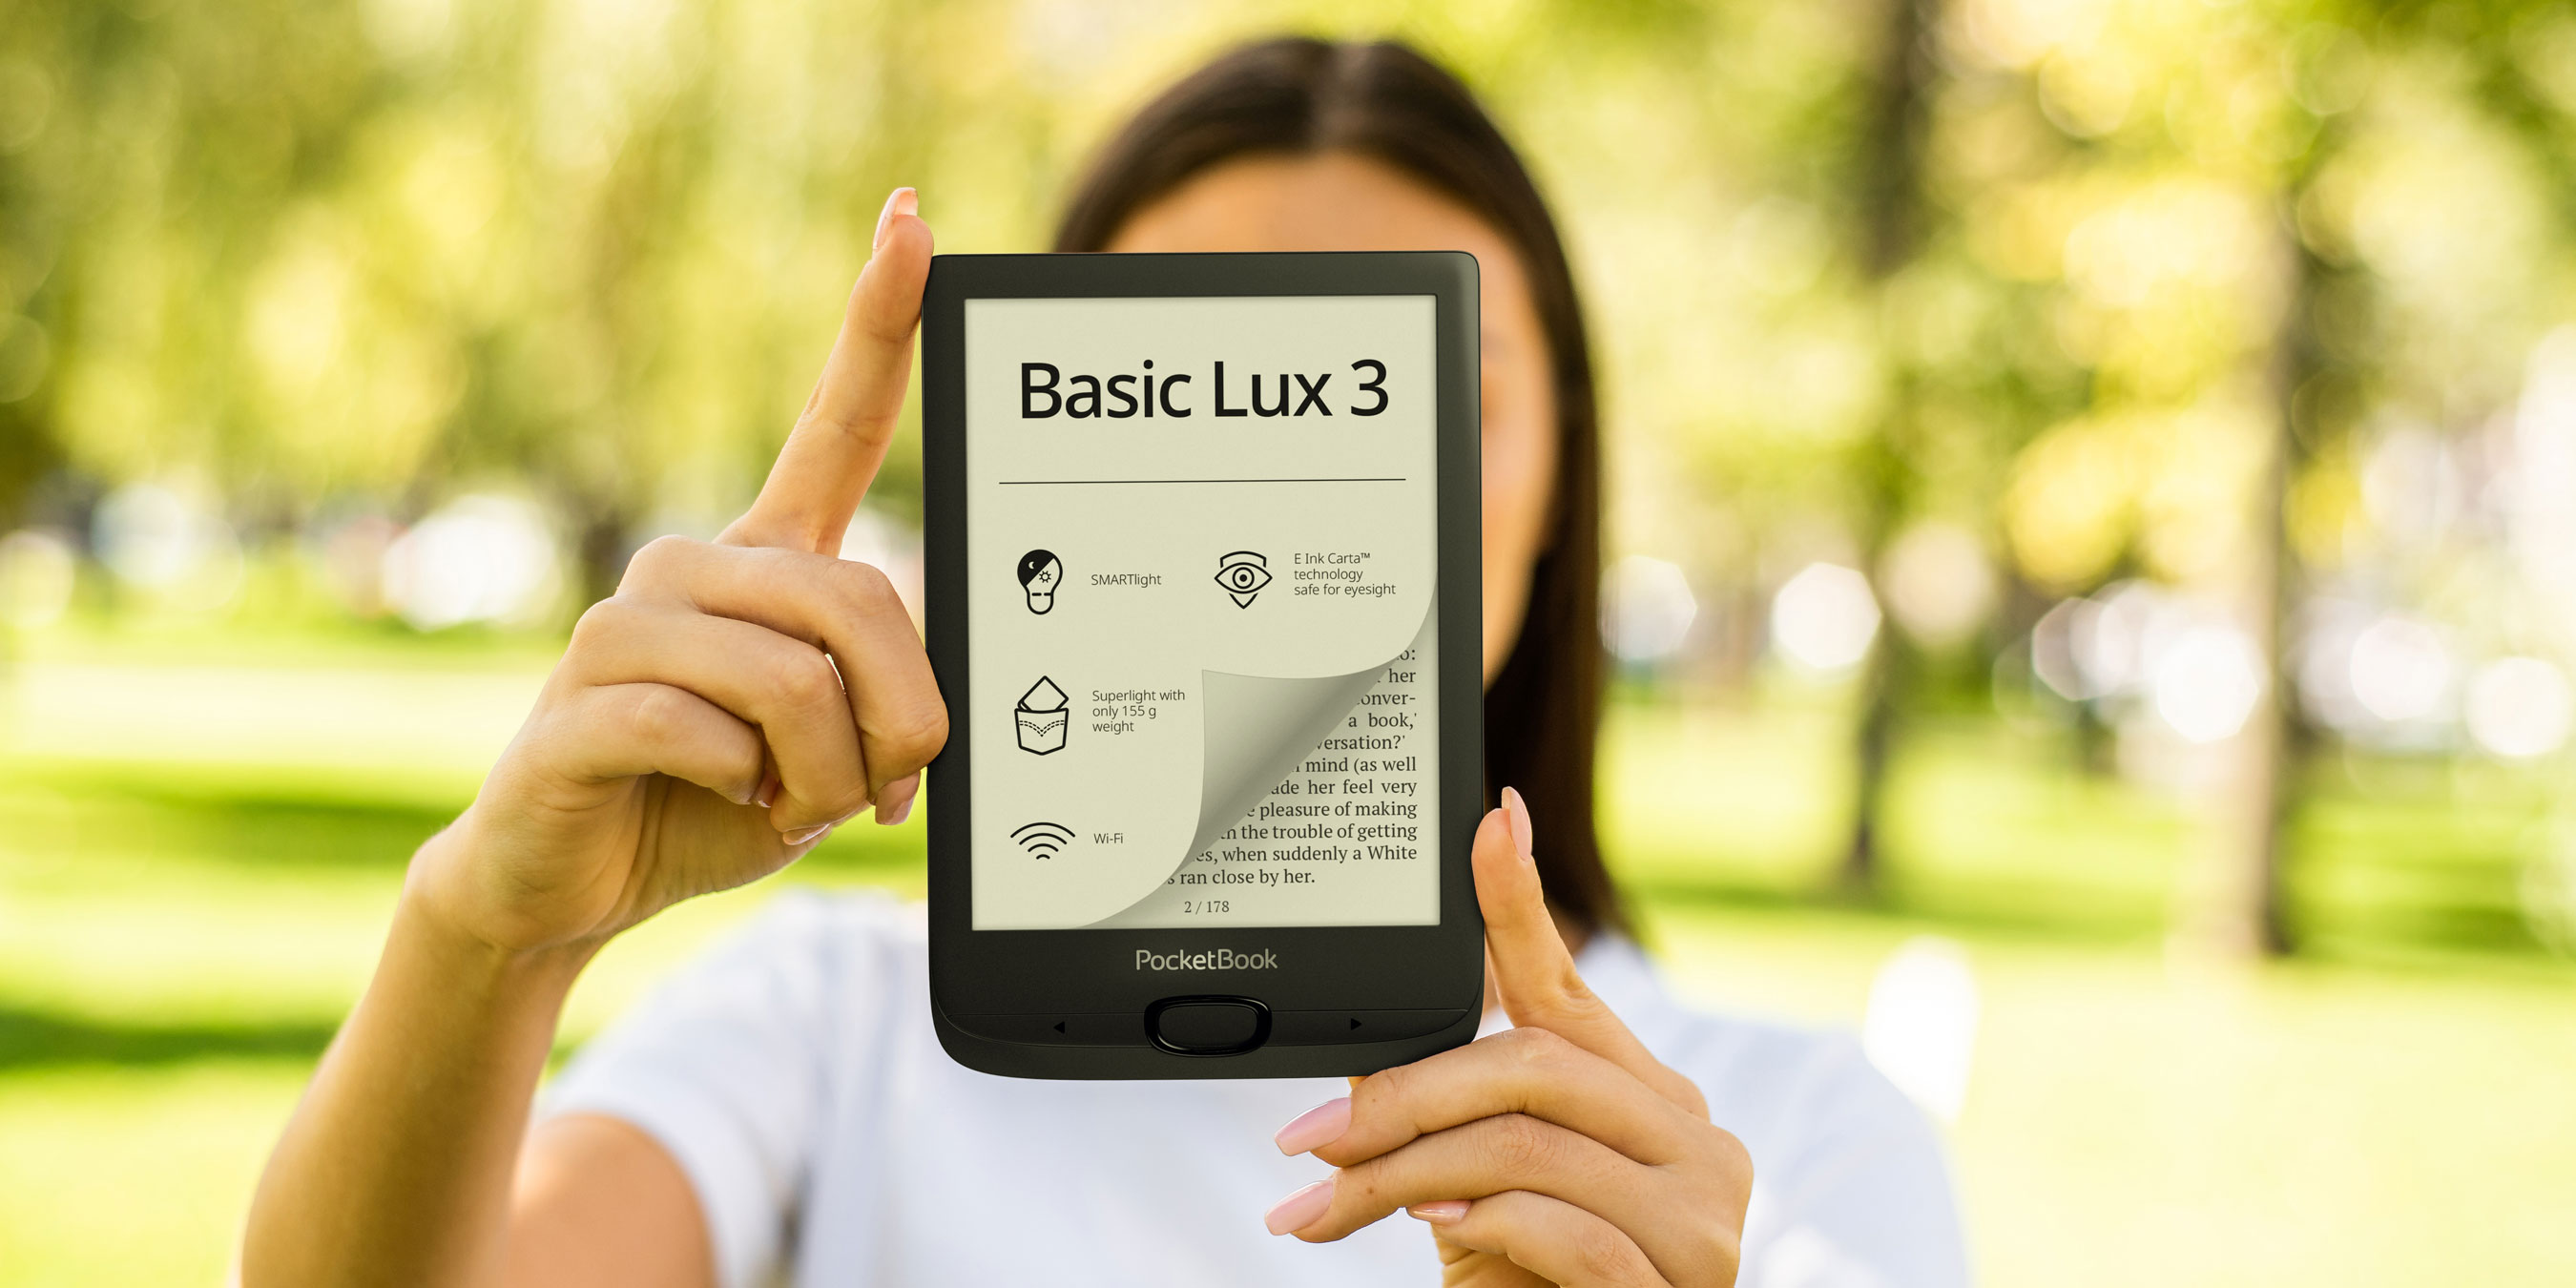 PocketBook Basic Lux 3: more possibilities, more comfort